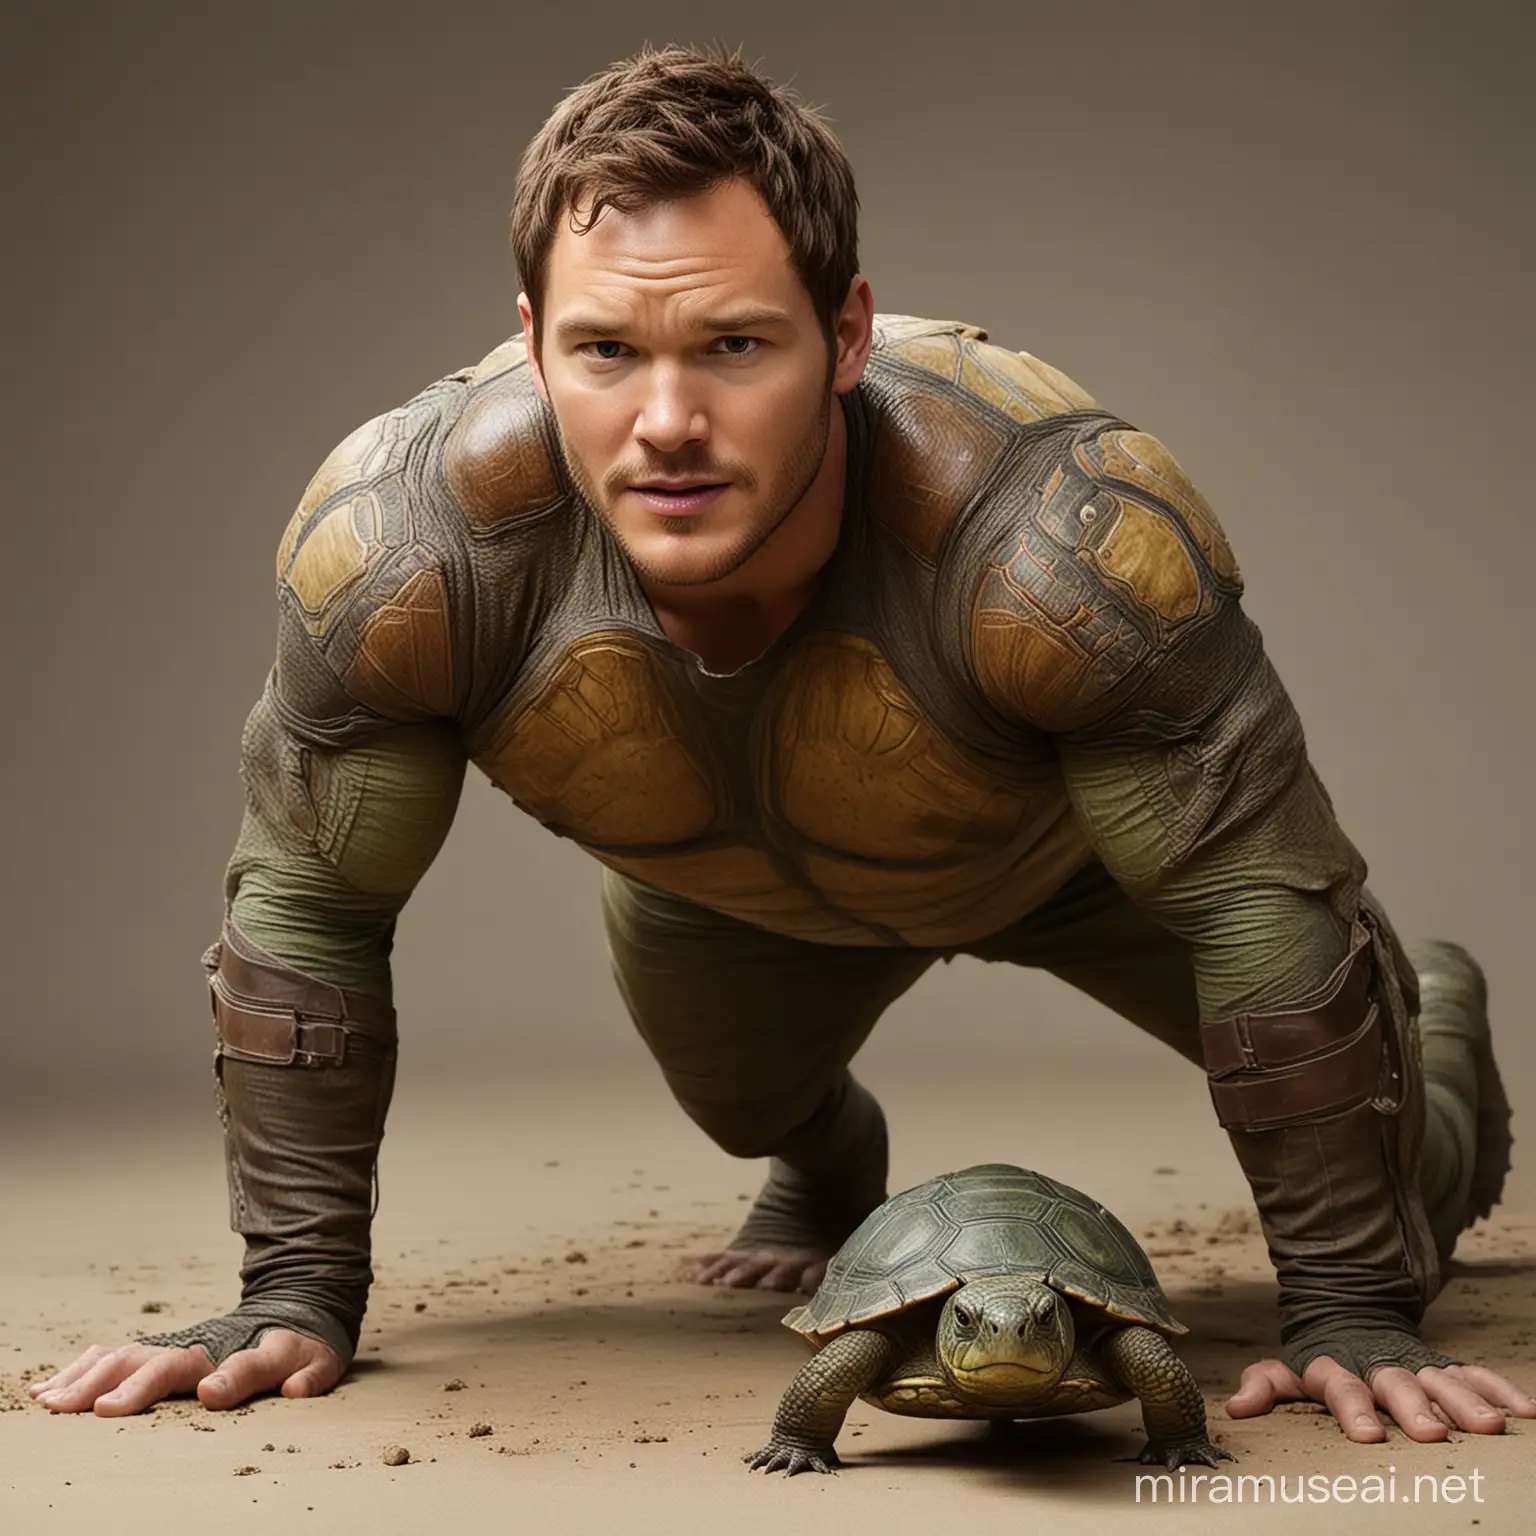 Chris Pratt on all fours transforming into a turtle. He's green. He has a turtle shell. And his head is human.